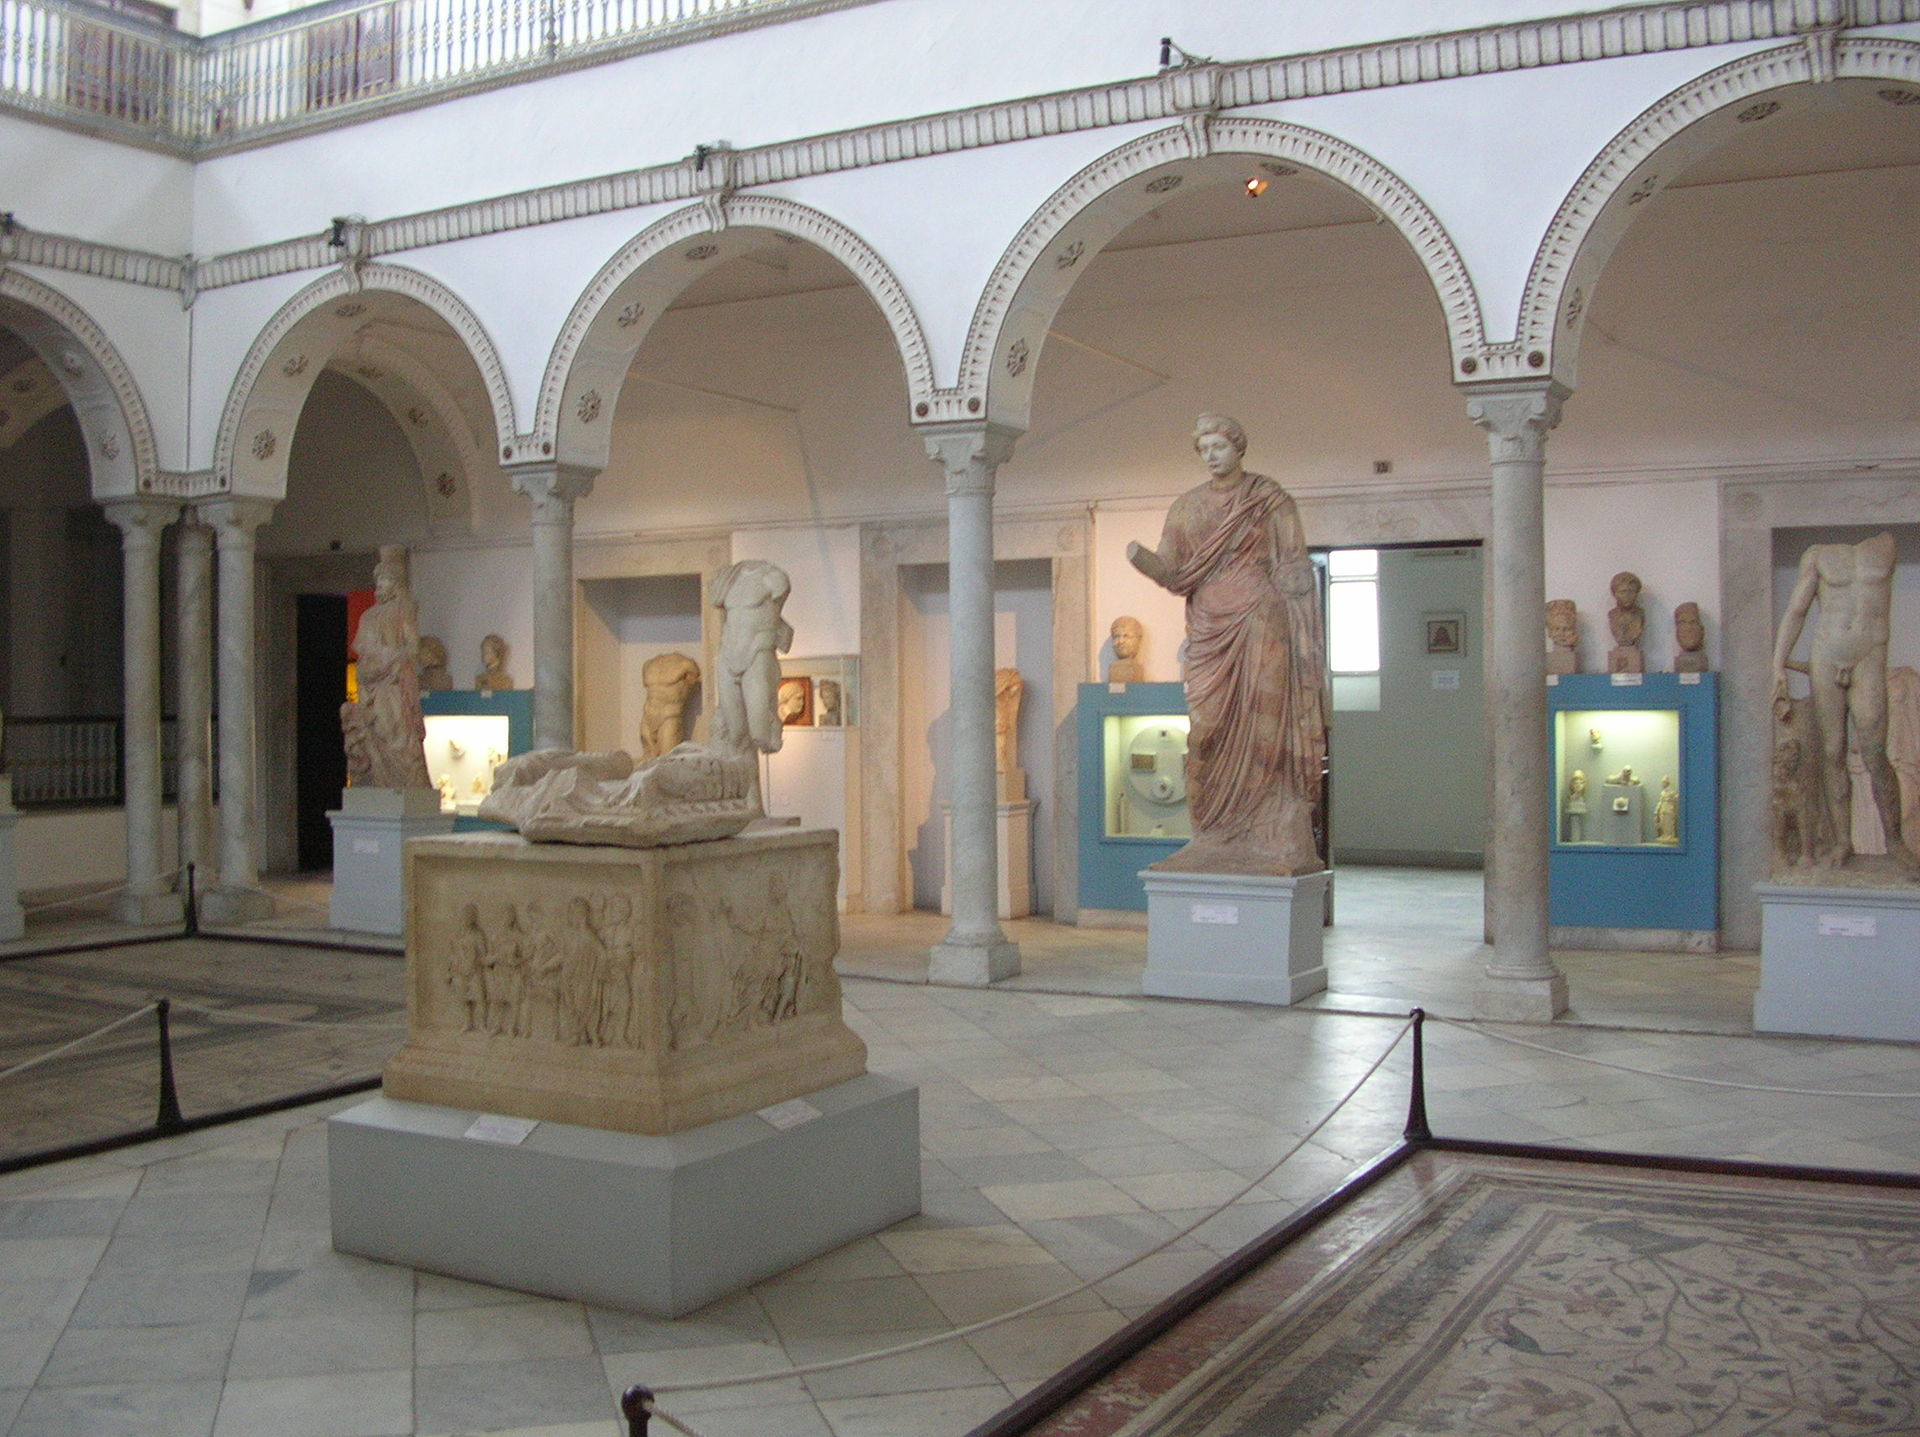 Carthage Room, Bardo Museum in Tunis, Tunisia. Photo taken in 2005 by Bernard Gagnon, licensed under the Creative Commons Attribution-Share Alike 3.0 Unported, 2.5 Generic, 2.0 Generic and 1.0 Generic license.